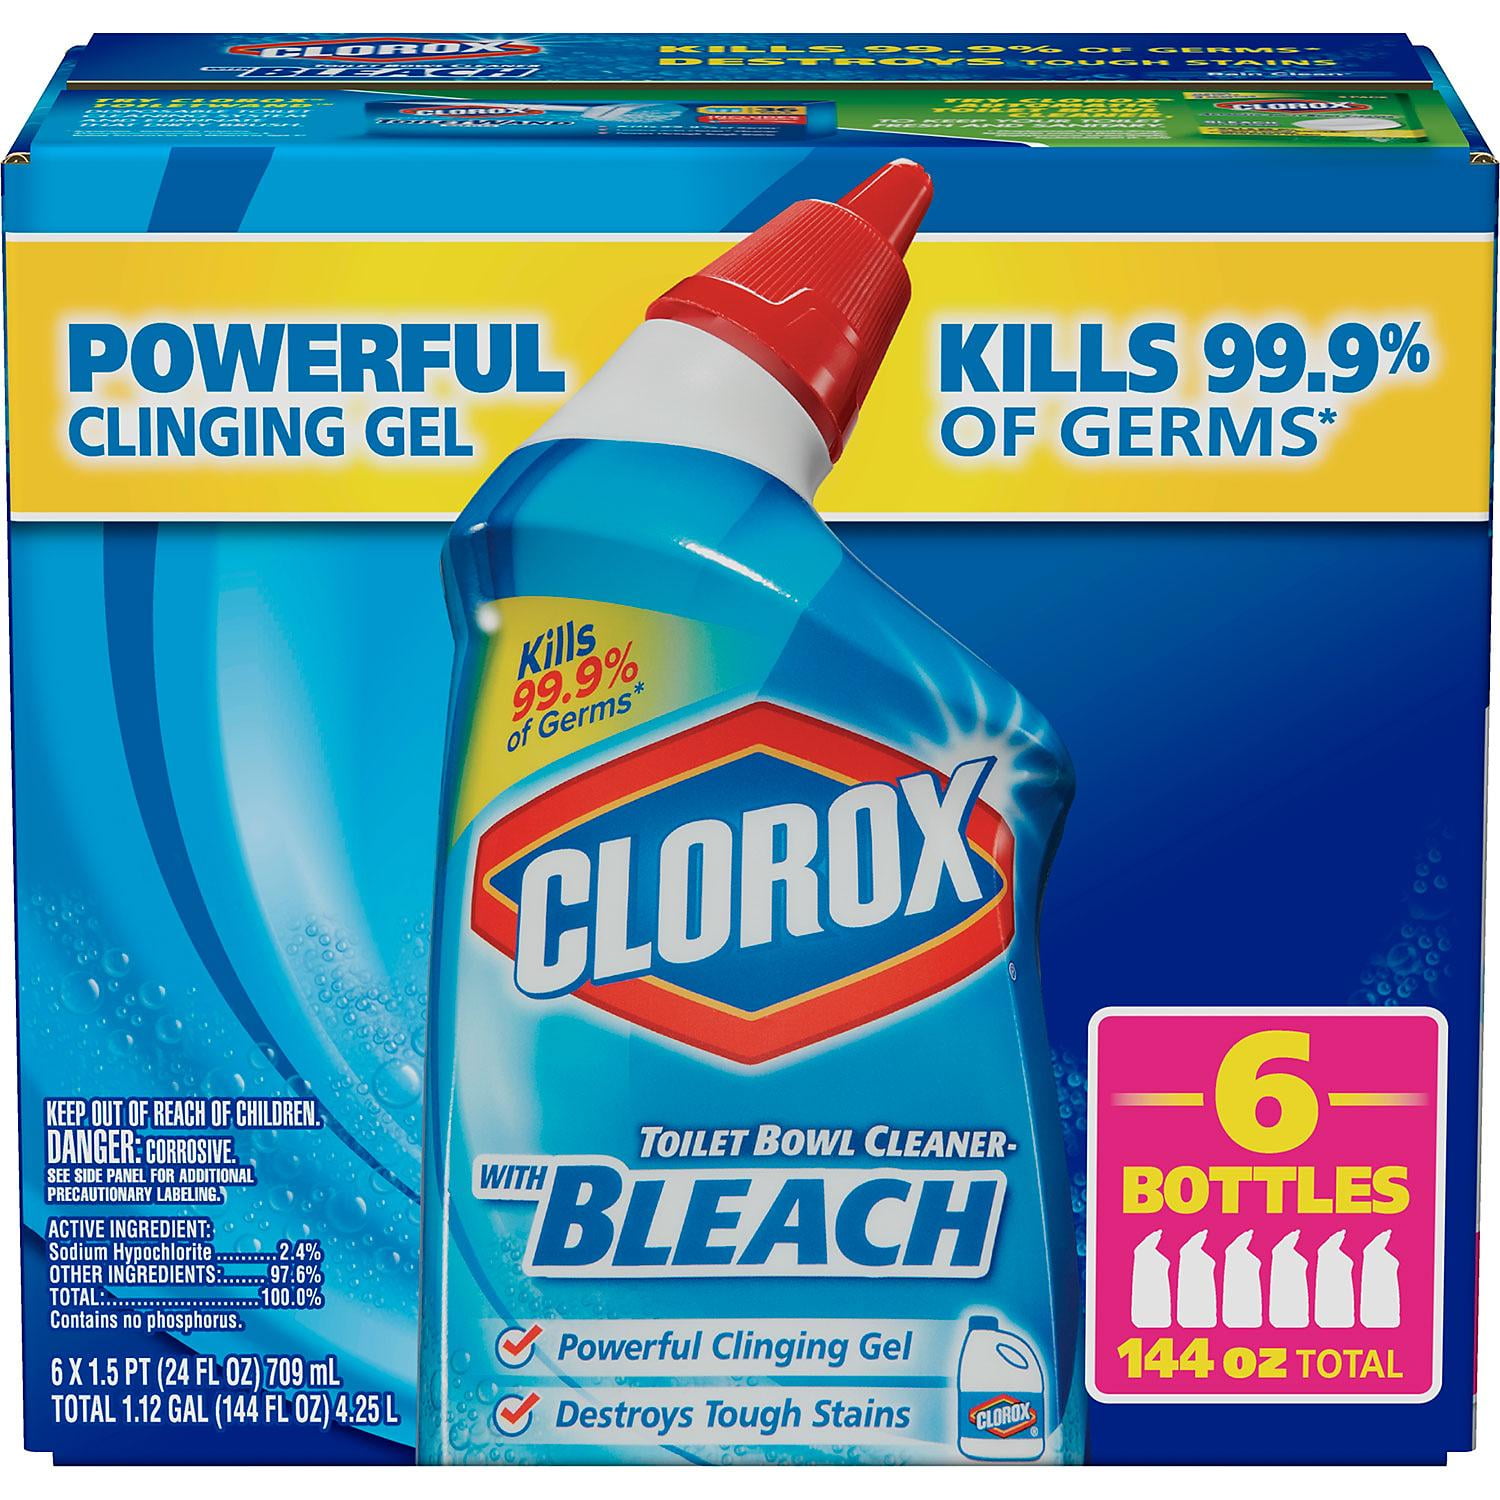 Clorox 30024 Automatic Toilet Bowl Cleaner: Toilet Bowl Cleaners  (044600300245-1)